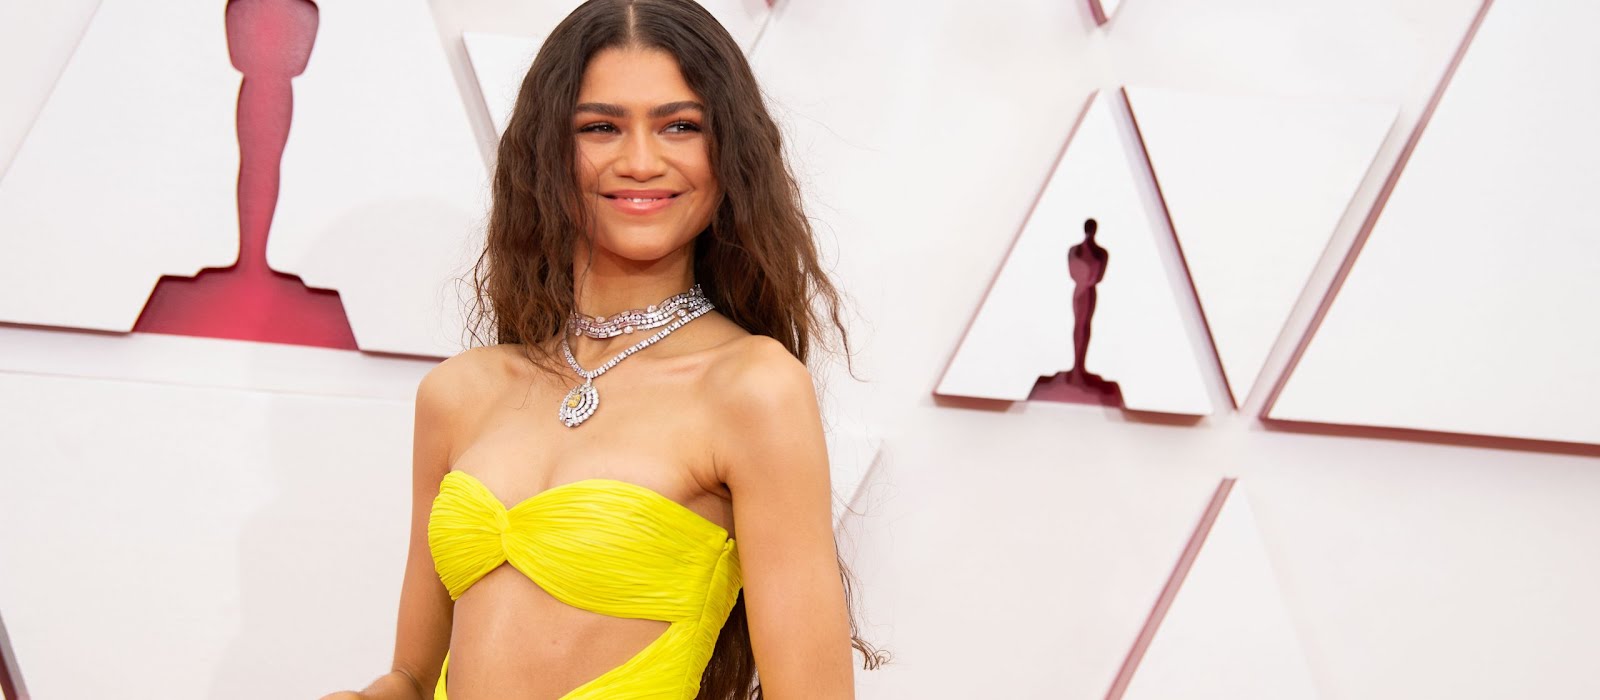 The best dressed stars at the 2021 Academy Awards